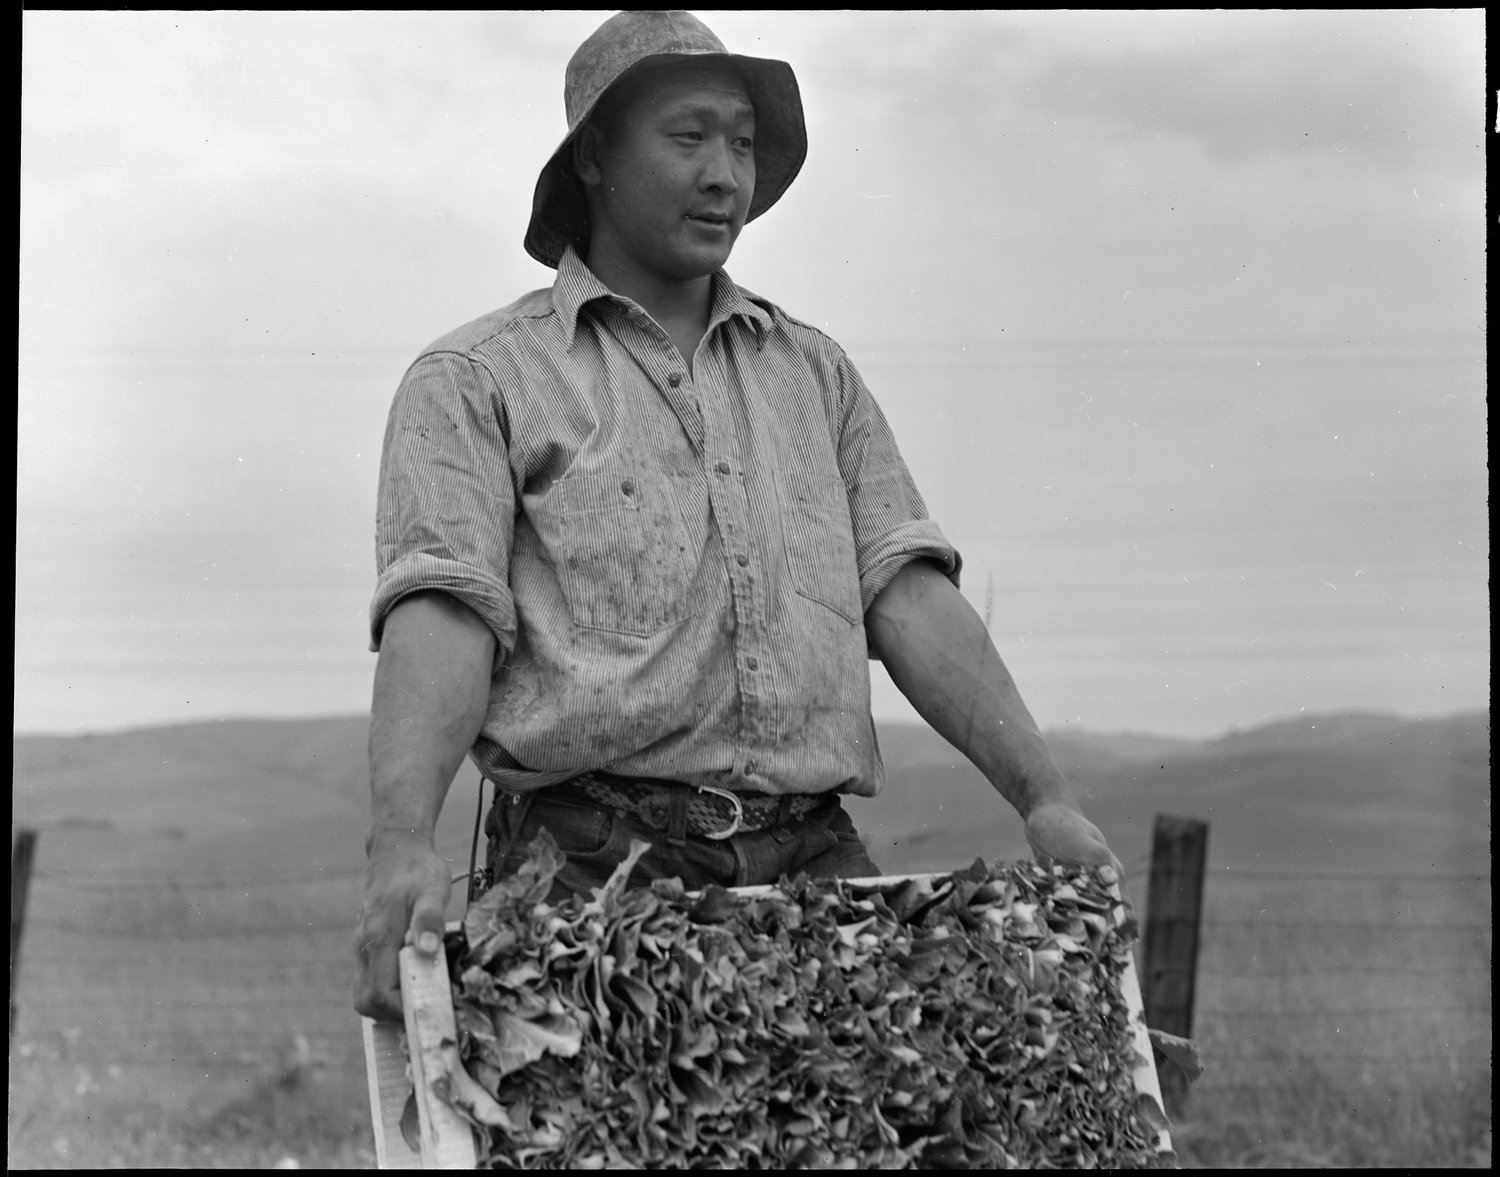  Centerville, California. Harvesting cauliflower on a ranch near Centerville on April 9, 1942, while evacuation of persons of Japanese descent was in progress. Evacuees will be housed in War Relocation Authority centers for the duration. 